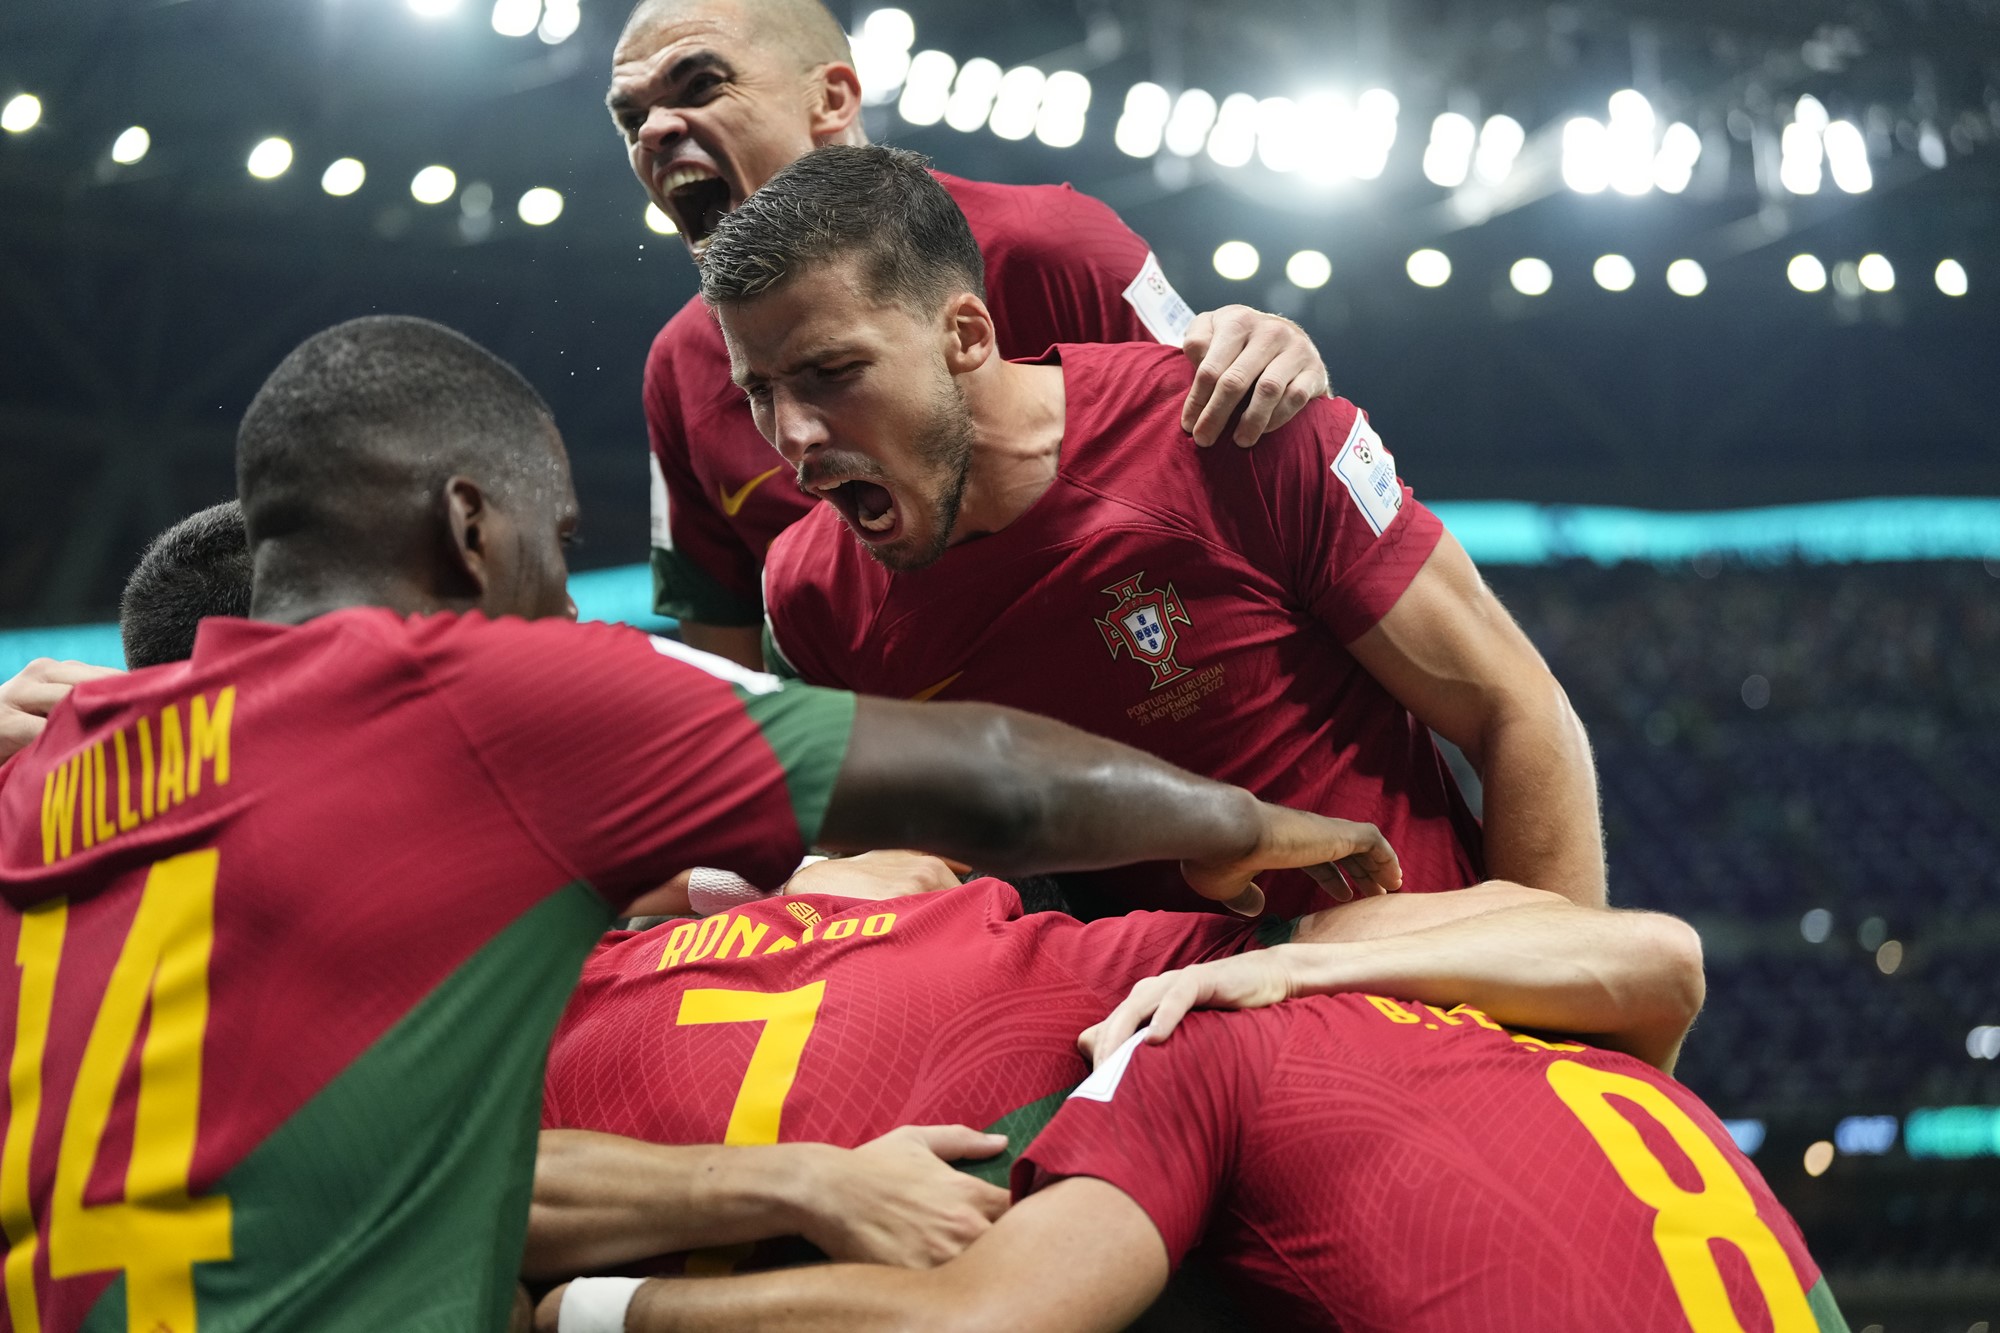 Bruno Fernandes and Portugal players celebrate with Cristiano Ronaldo after a goal